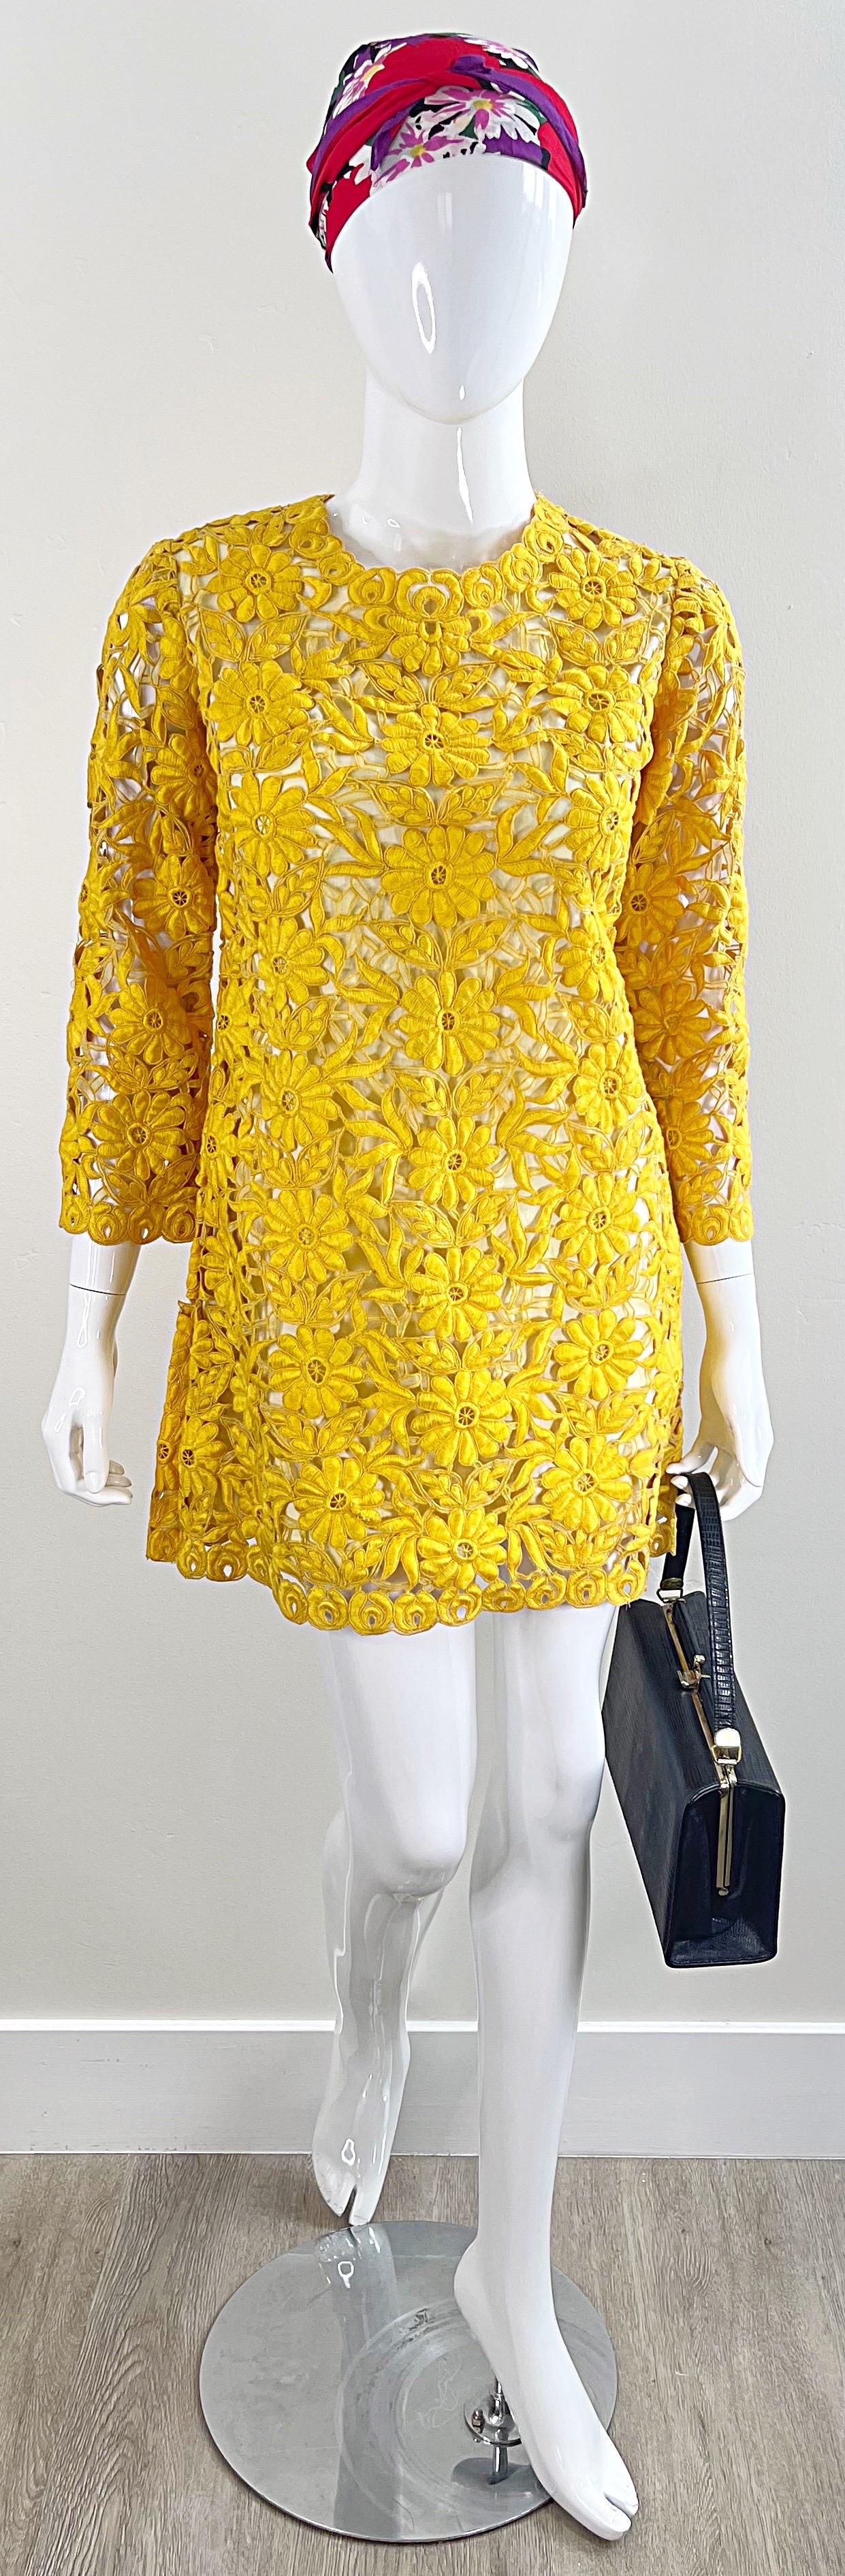 Chic 1960s mustard yellow crochet mod mini dress, or tunic top ! The body is fully lined in white cotton, while the crochet on the sleeves reveals skin. Tailored sleek fit. Full metal zipper up the back with hook-and-eye closure. Very well made,